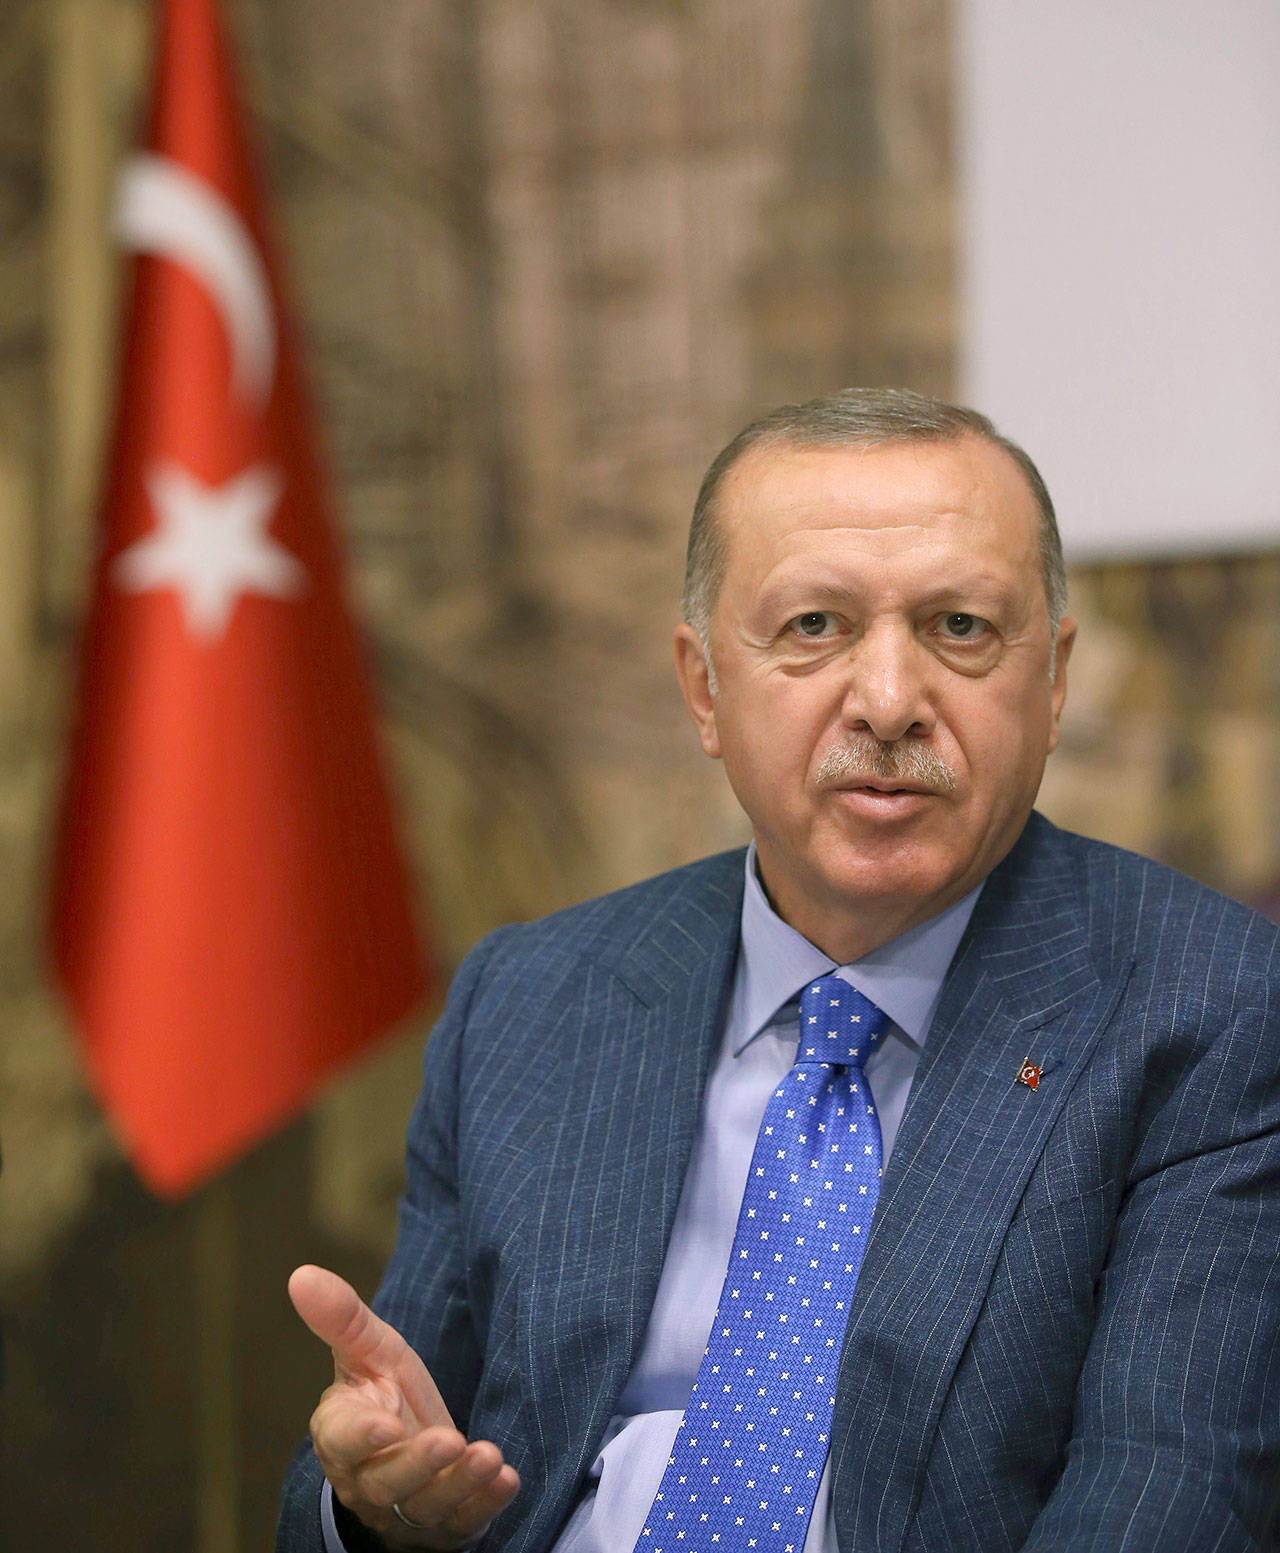 Turkey’s President Recep Tayyip Erdogan speaks to Turkish journalists Sunday in Istanbul. Erdogan has rejected offers for mediation with Syrian Kurdish fighters as the Turkish military continues its offensive against them in northern Syria. (Presidential Press Service via AP, Pool)